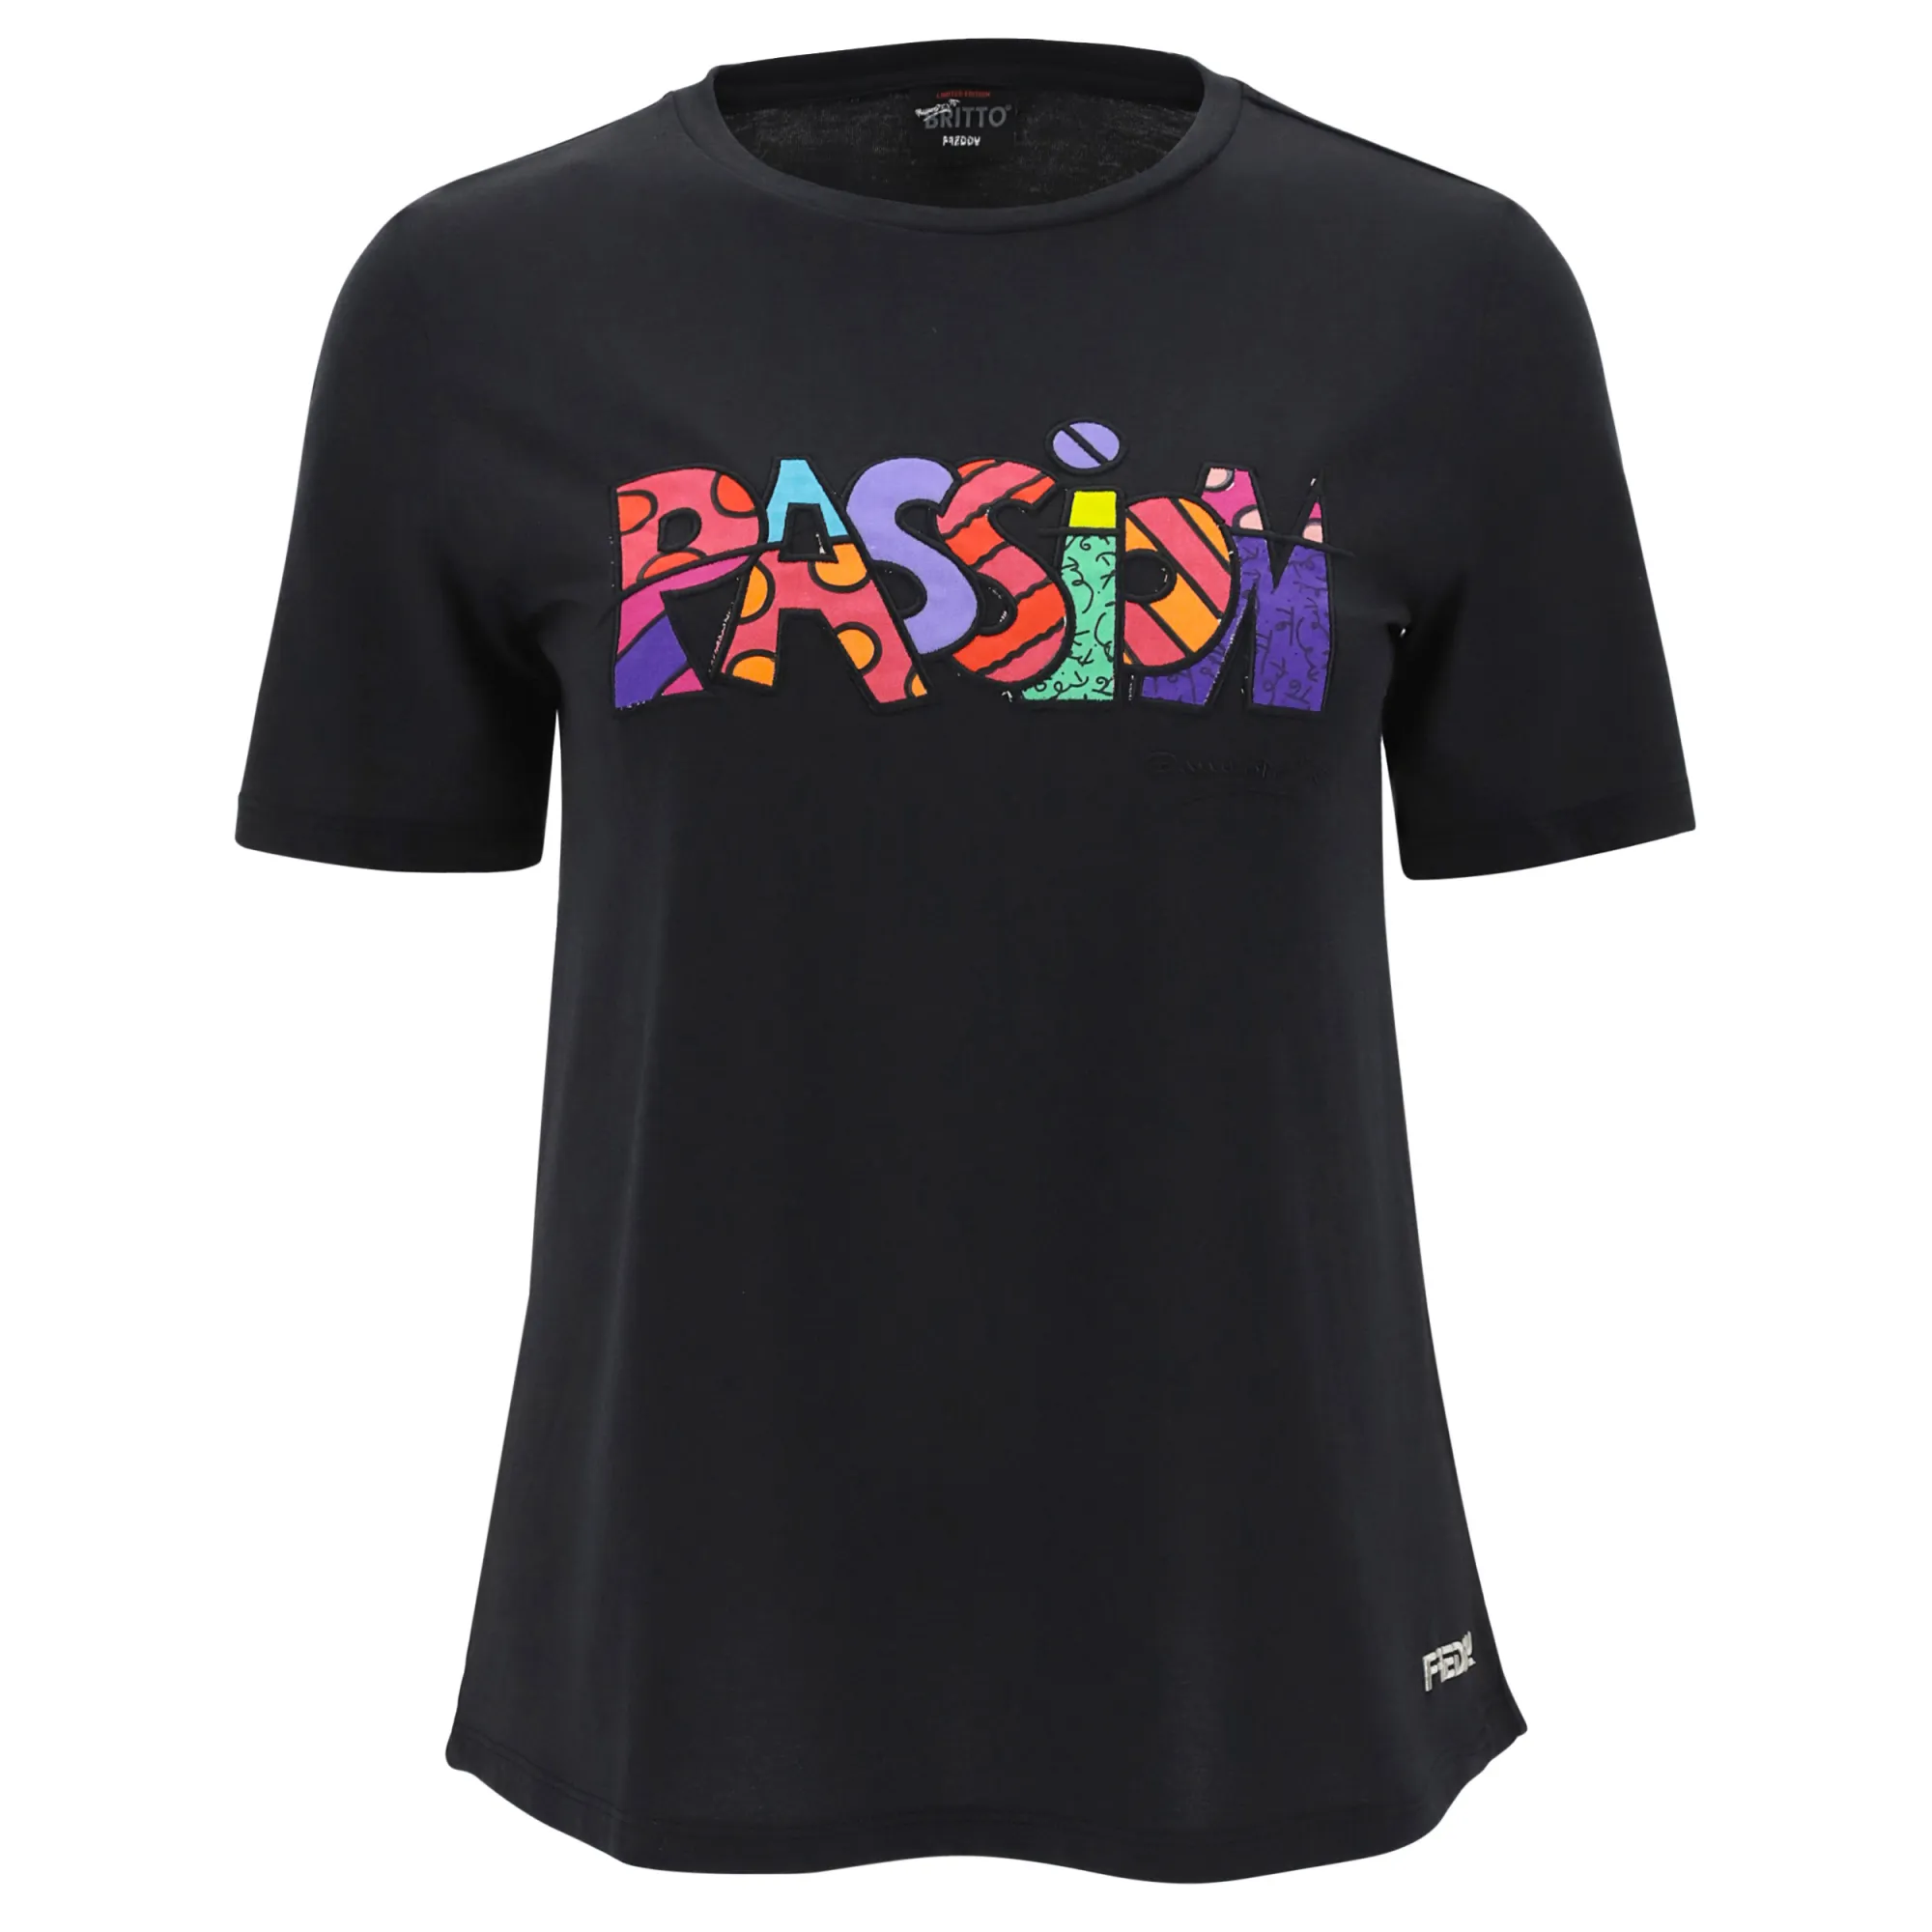 Passion Patch T-Shirt - Romero Britto Collection